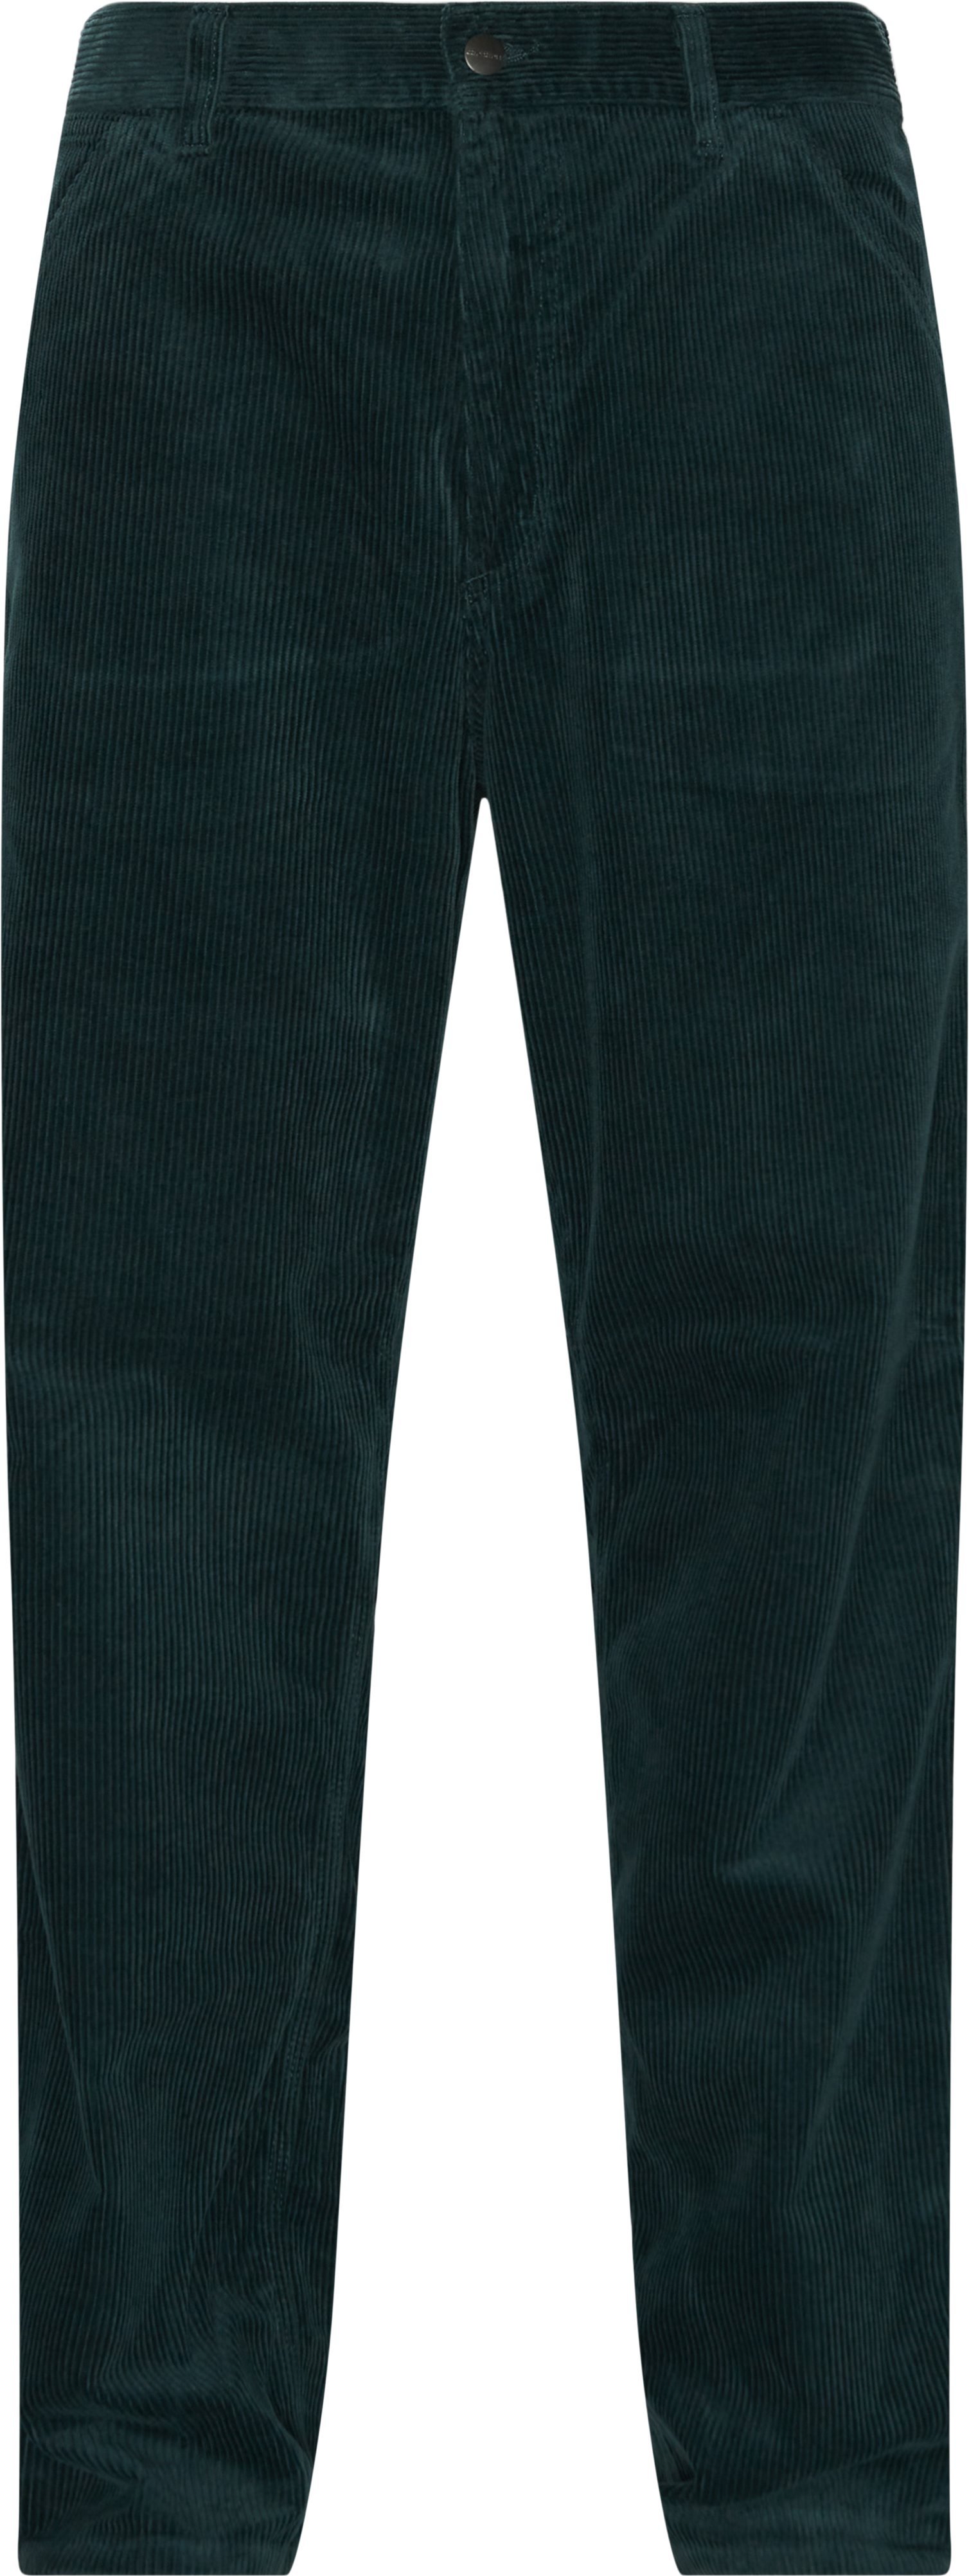 Simple Pant Jeans - Trousers - Straight fit - Green